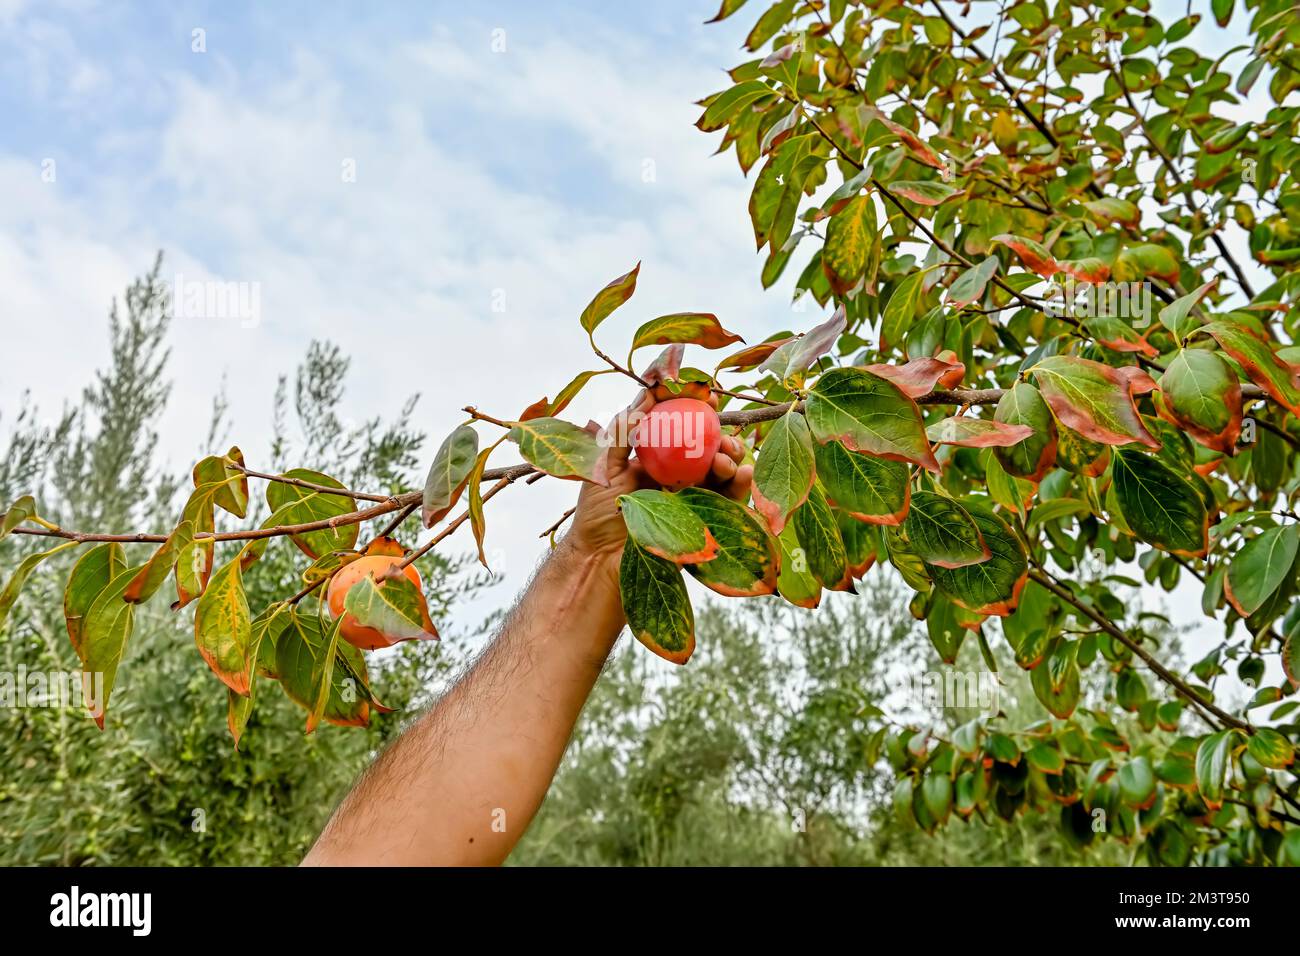 Man's hands picking the ripe persimmon fruit hanging from the tree branch Stock Photo